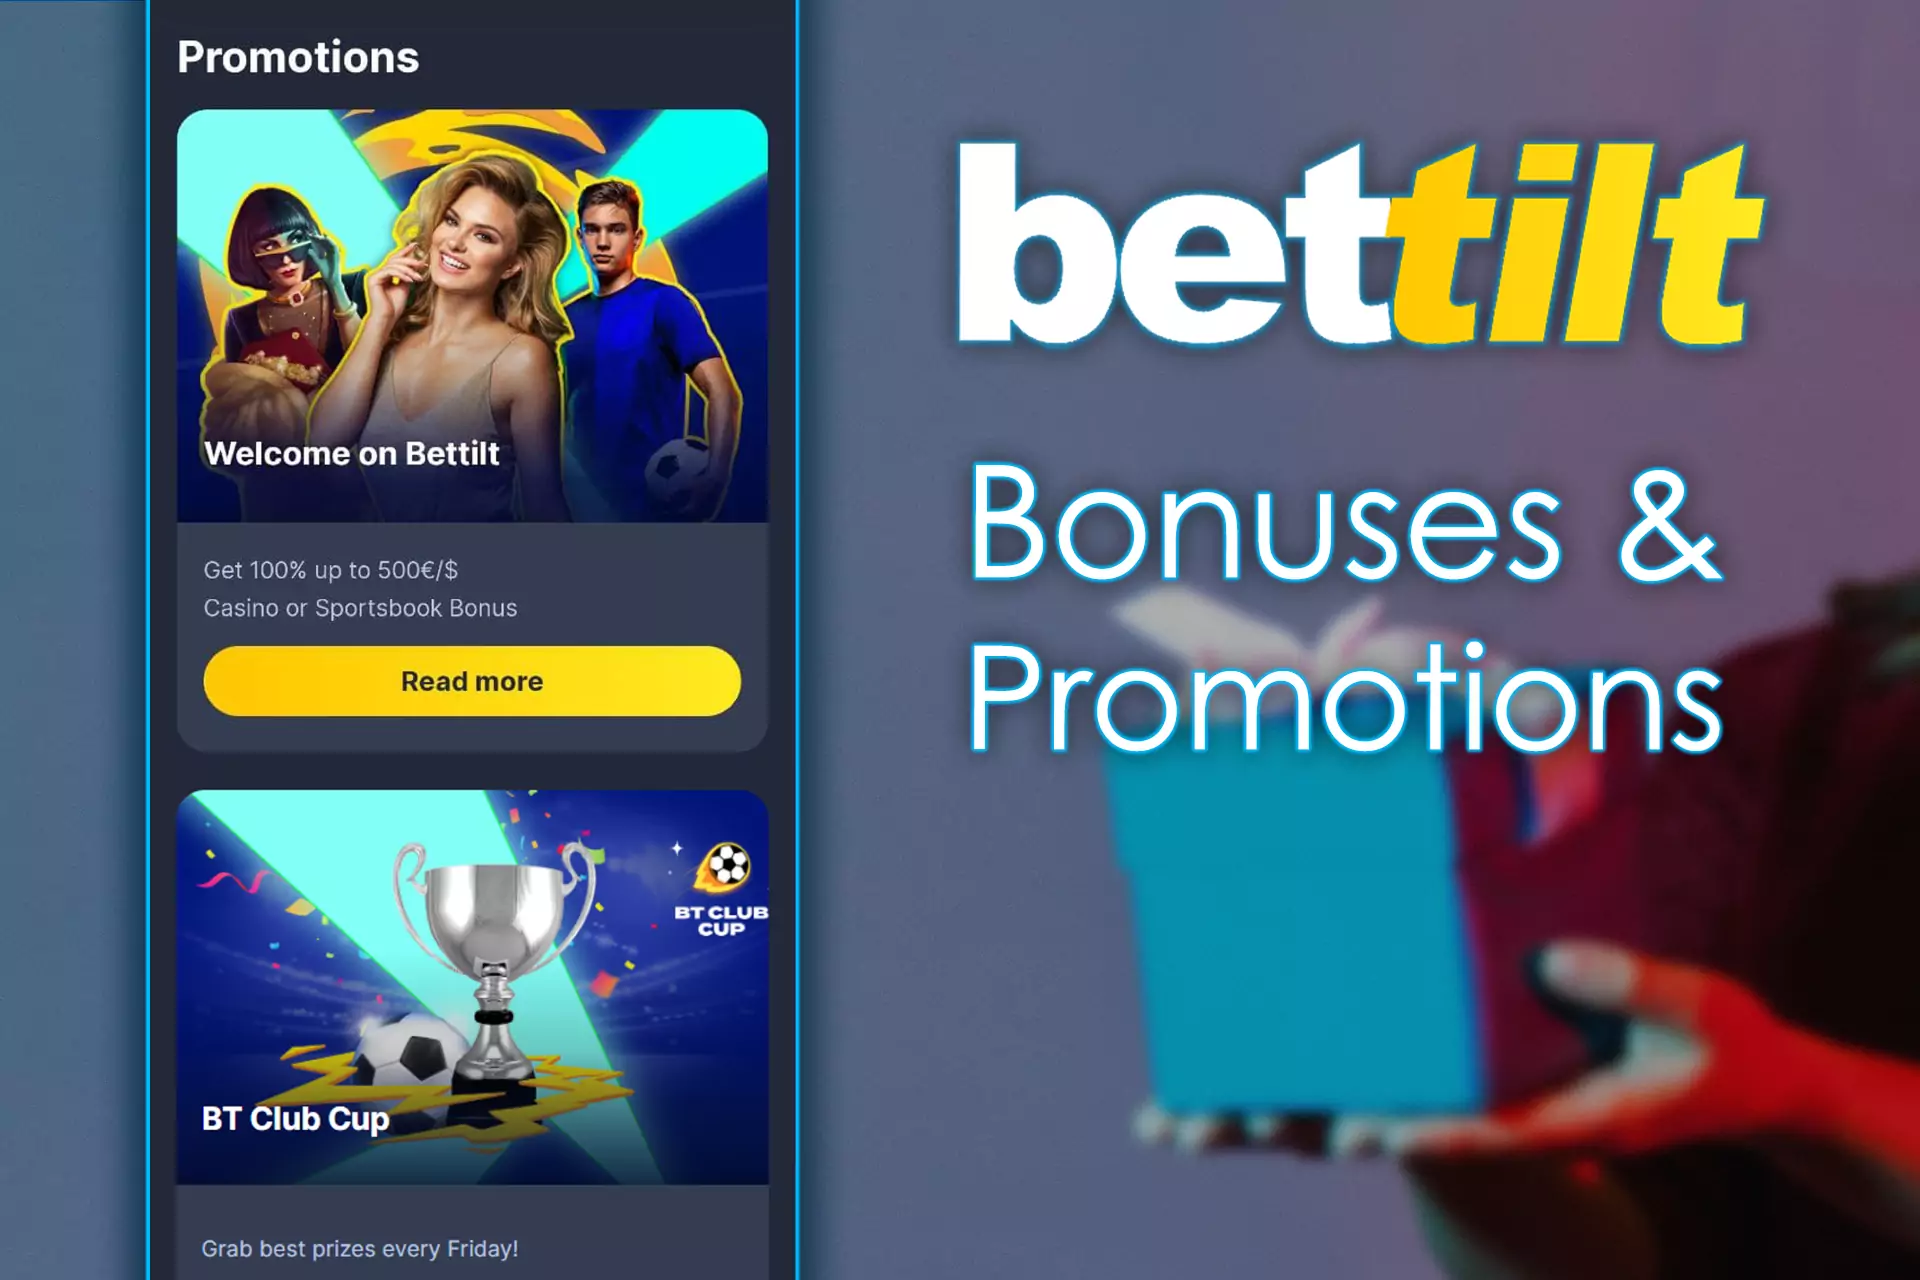 If you have just registered you can claim the welcome bonus from the Bettilt.